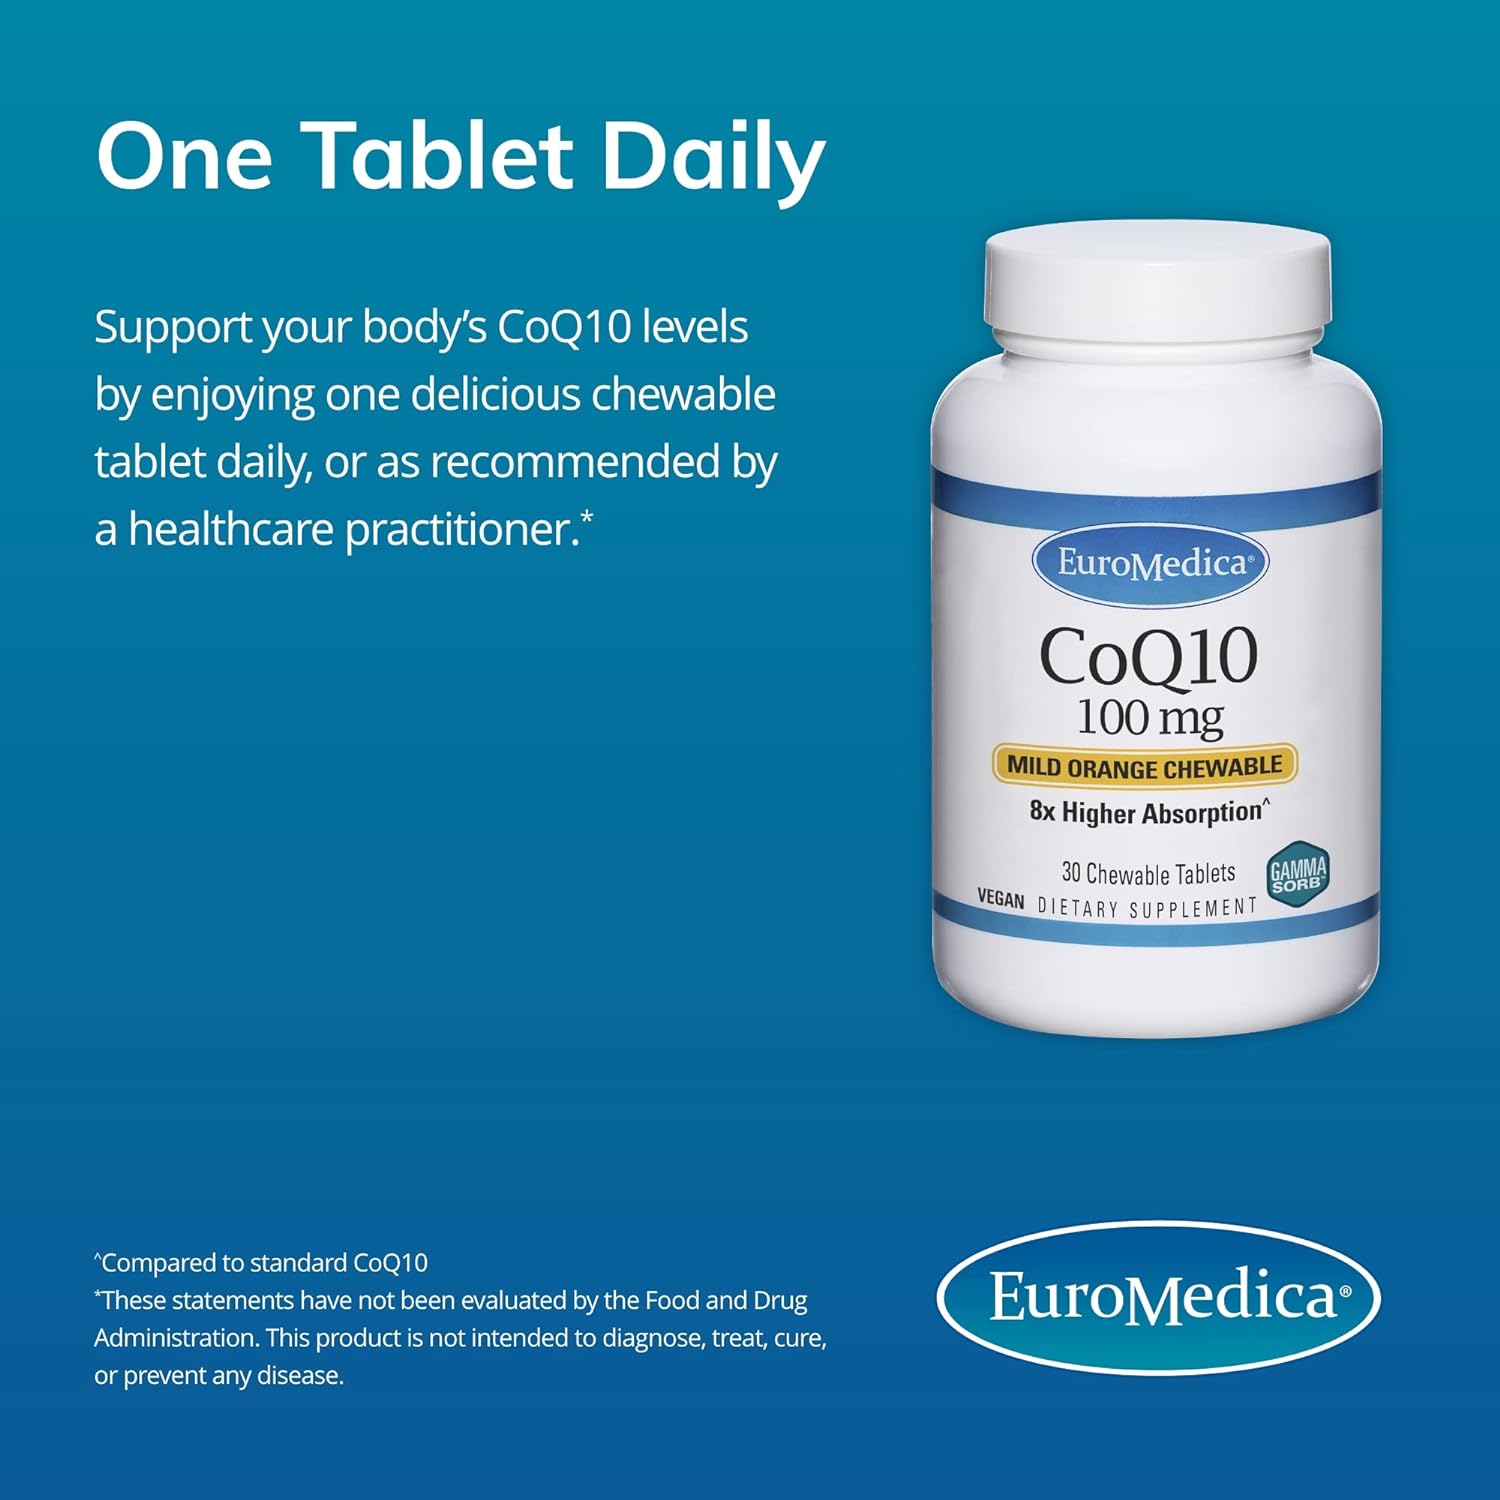 Euromedica CoQ10 Chewable, 100 mg - 30 Tablets - 8X Higher Absorption 